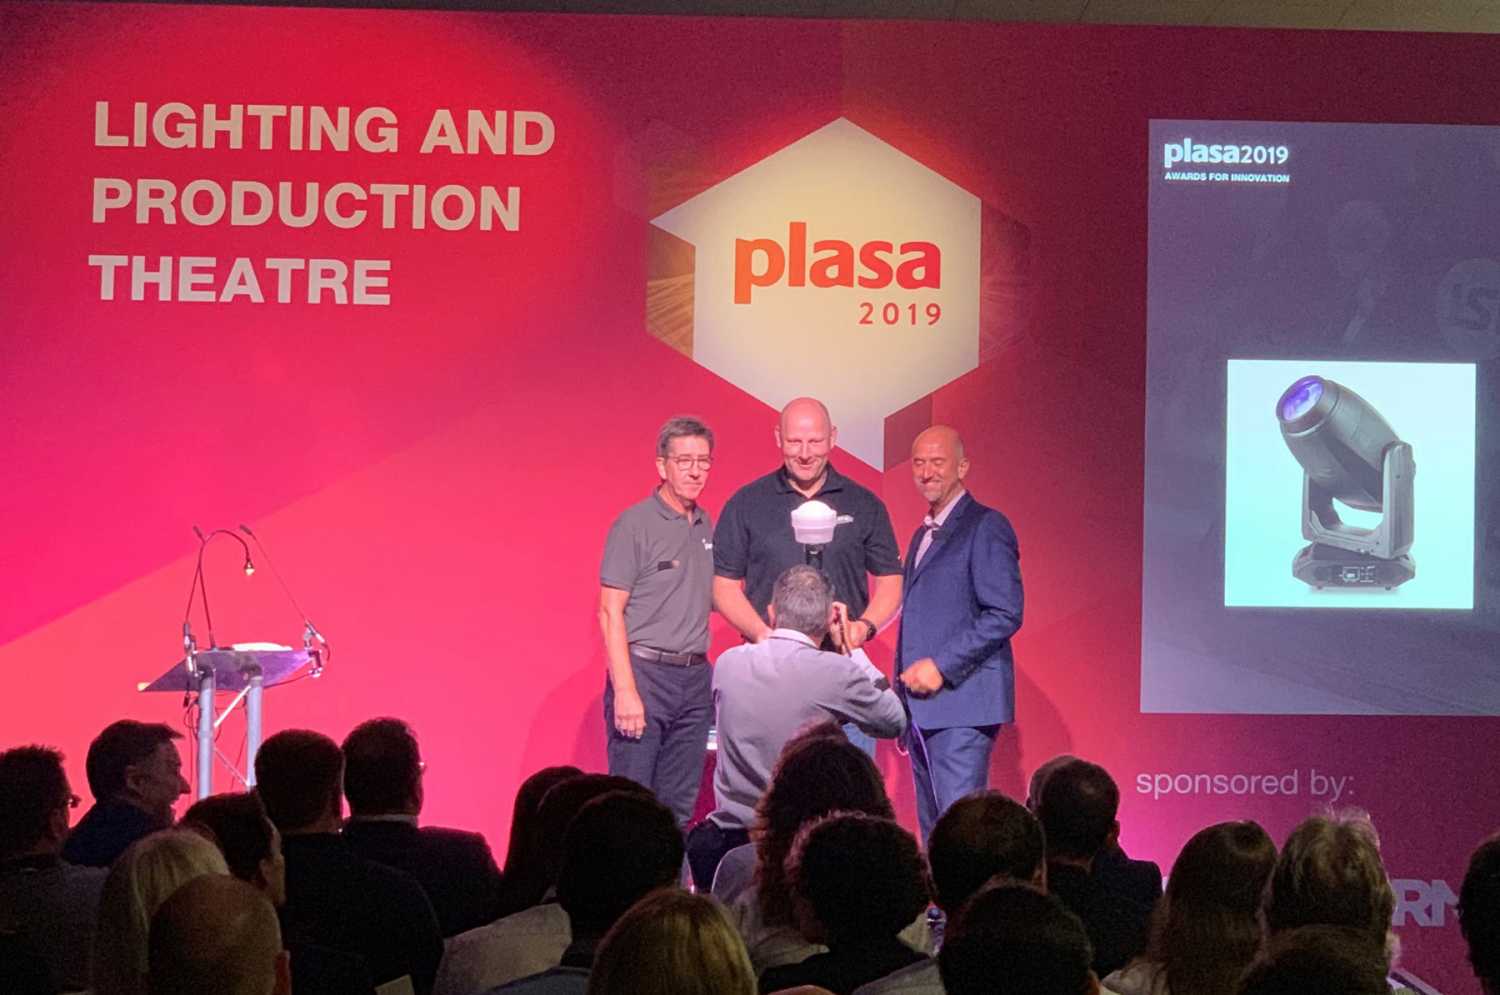 Elation product manager Matthias Hinrichs accepts the 2019 PLASA Award for Innovation